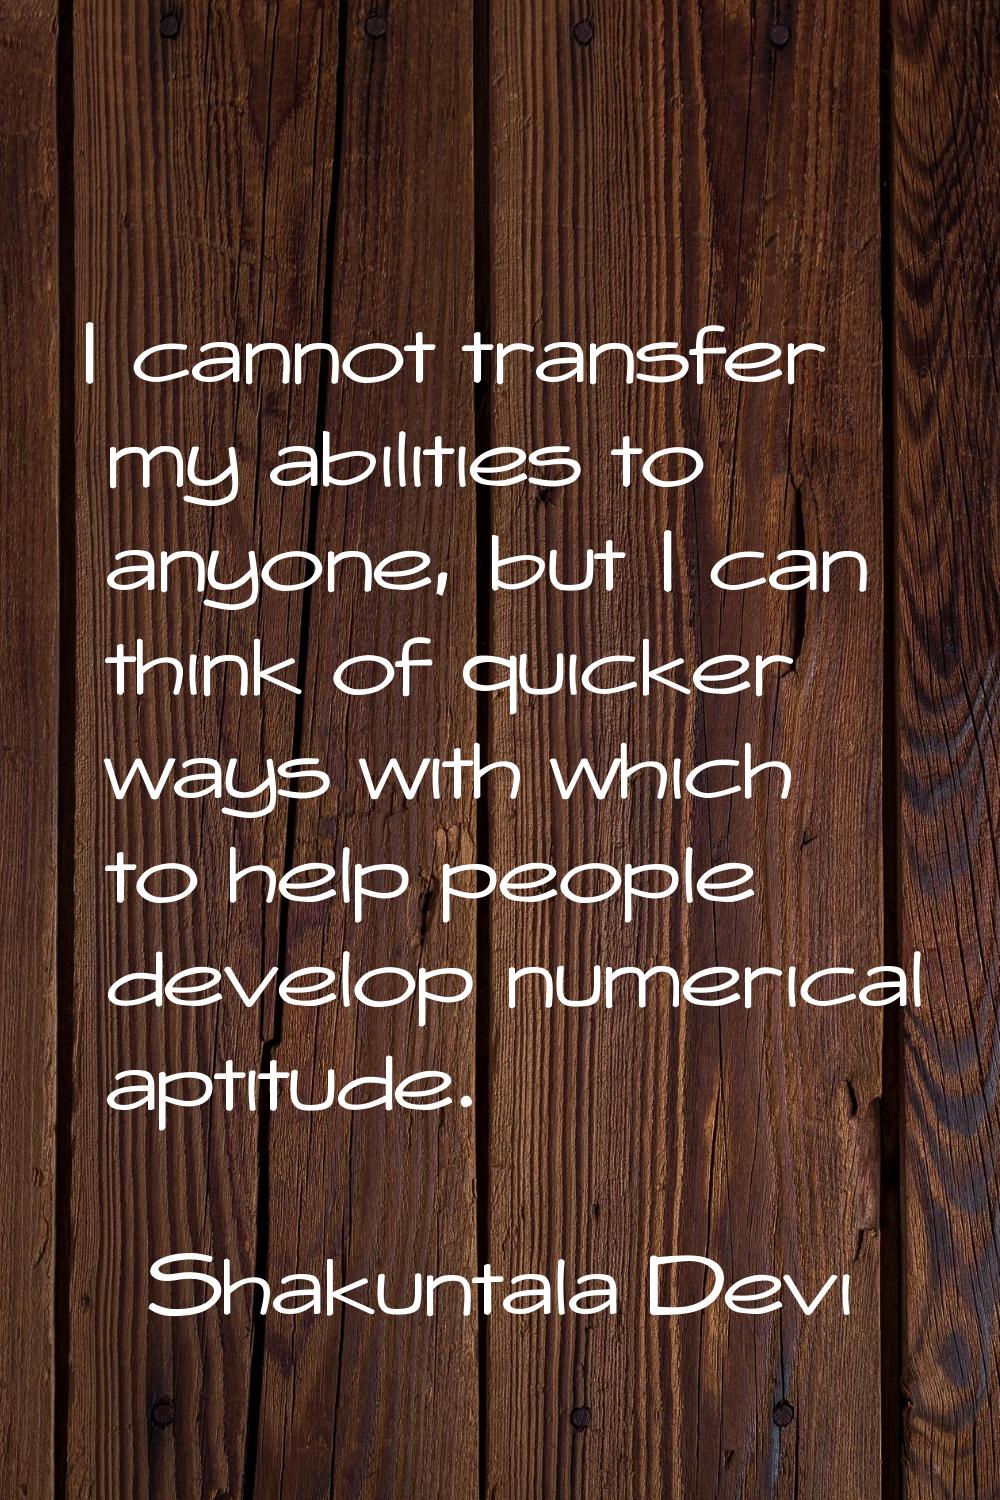 I cannot transfer my abilities to anyone, but I can think of quicker ways with which to help people